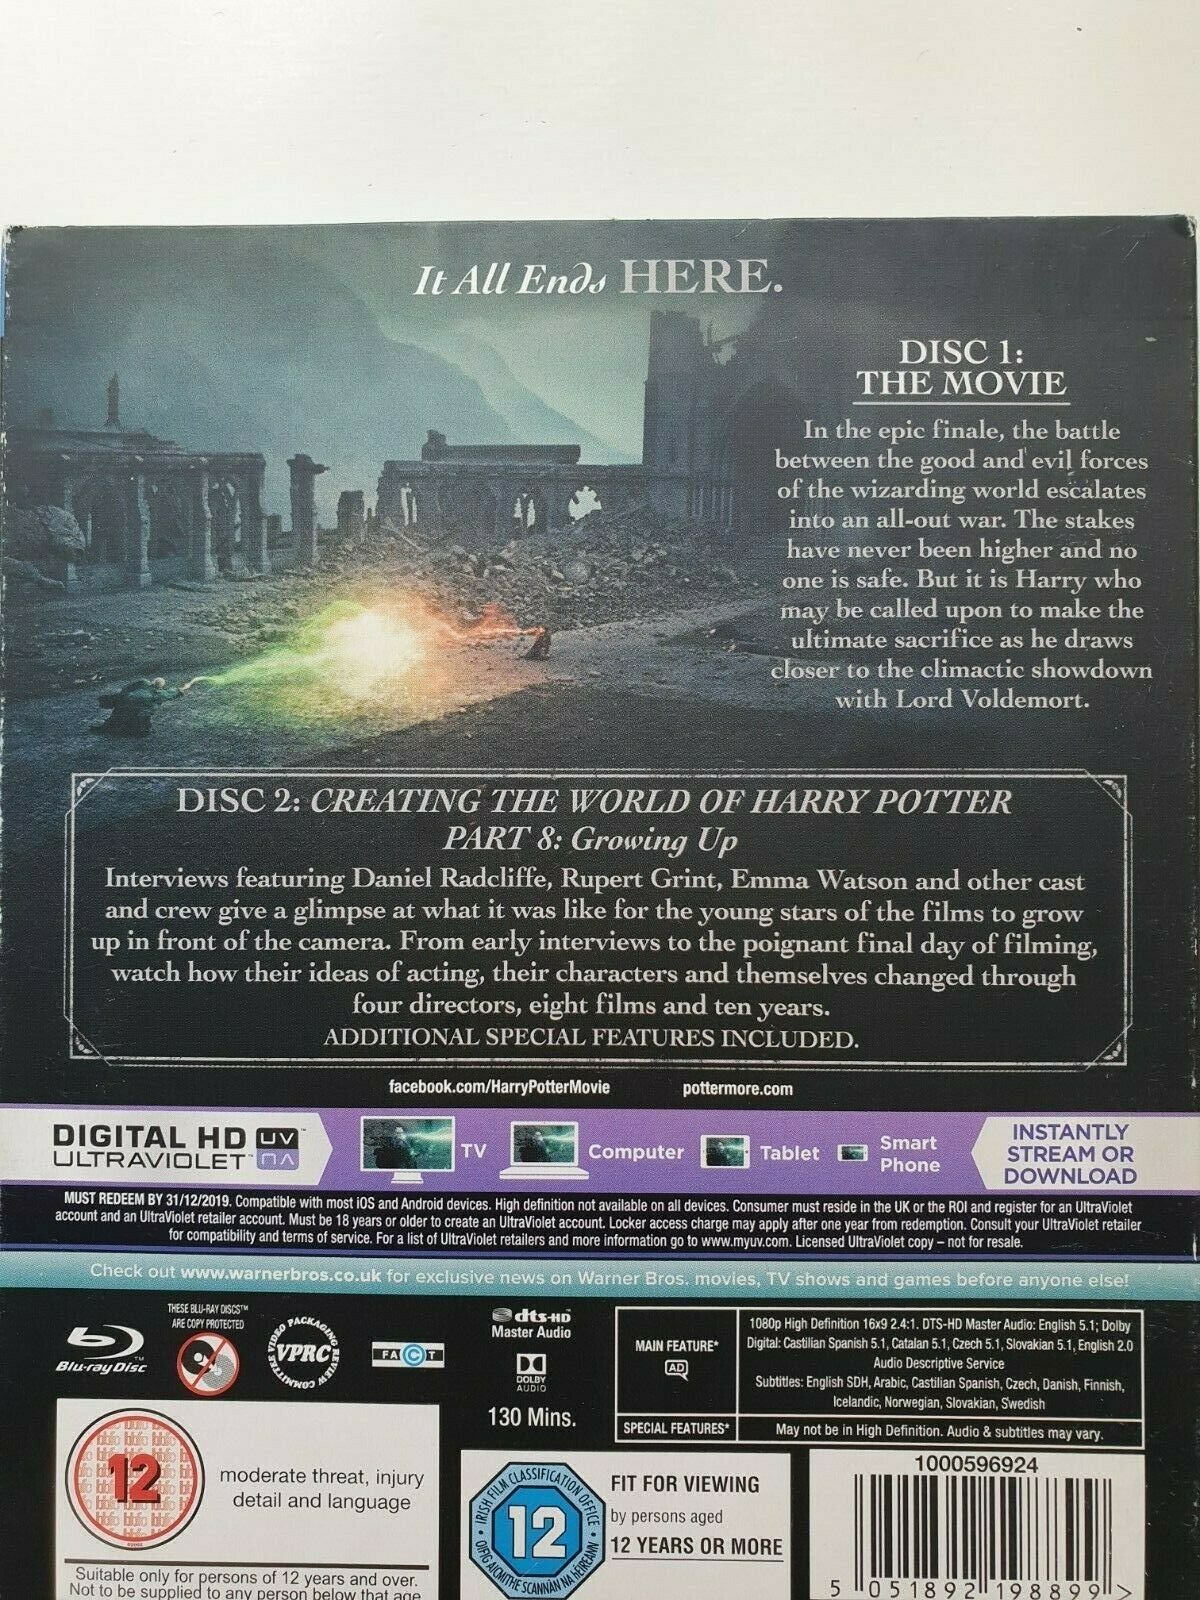 5051892198899 Harry Potter and the Deathly Hallows: Part 2 Blu-ray + Digital UV 2016 NEW SEALE